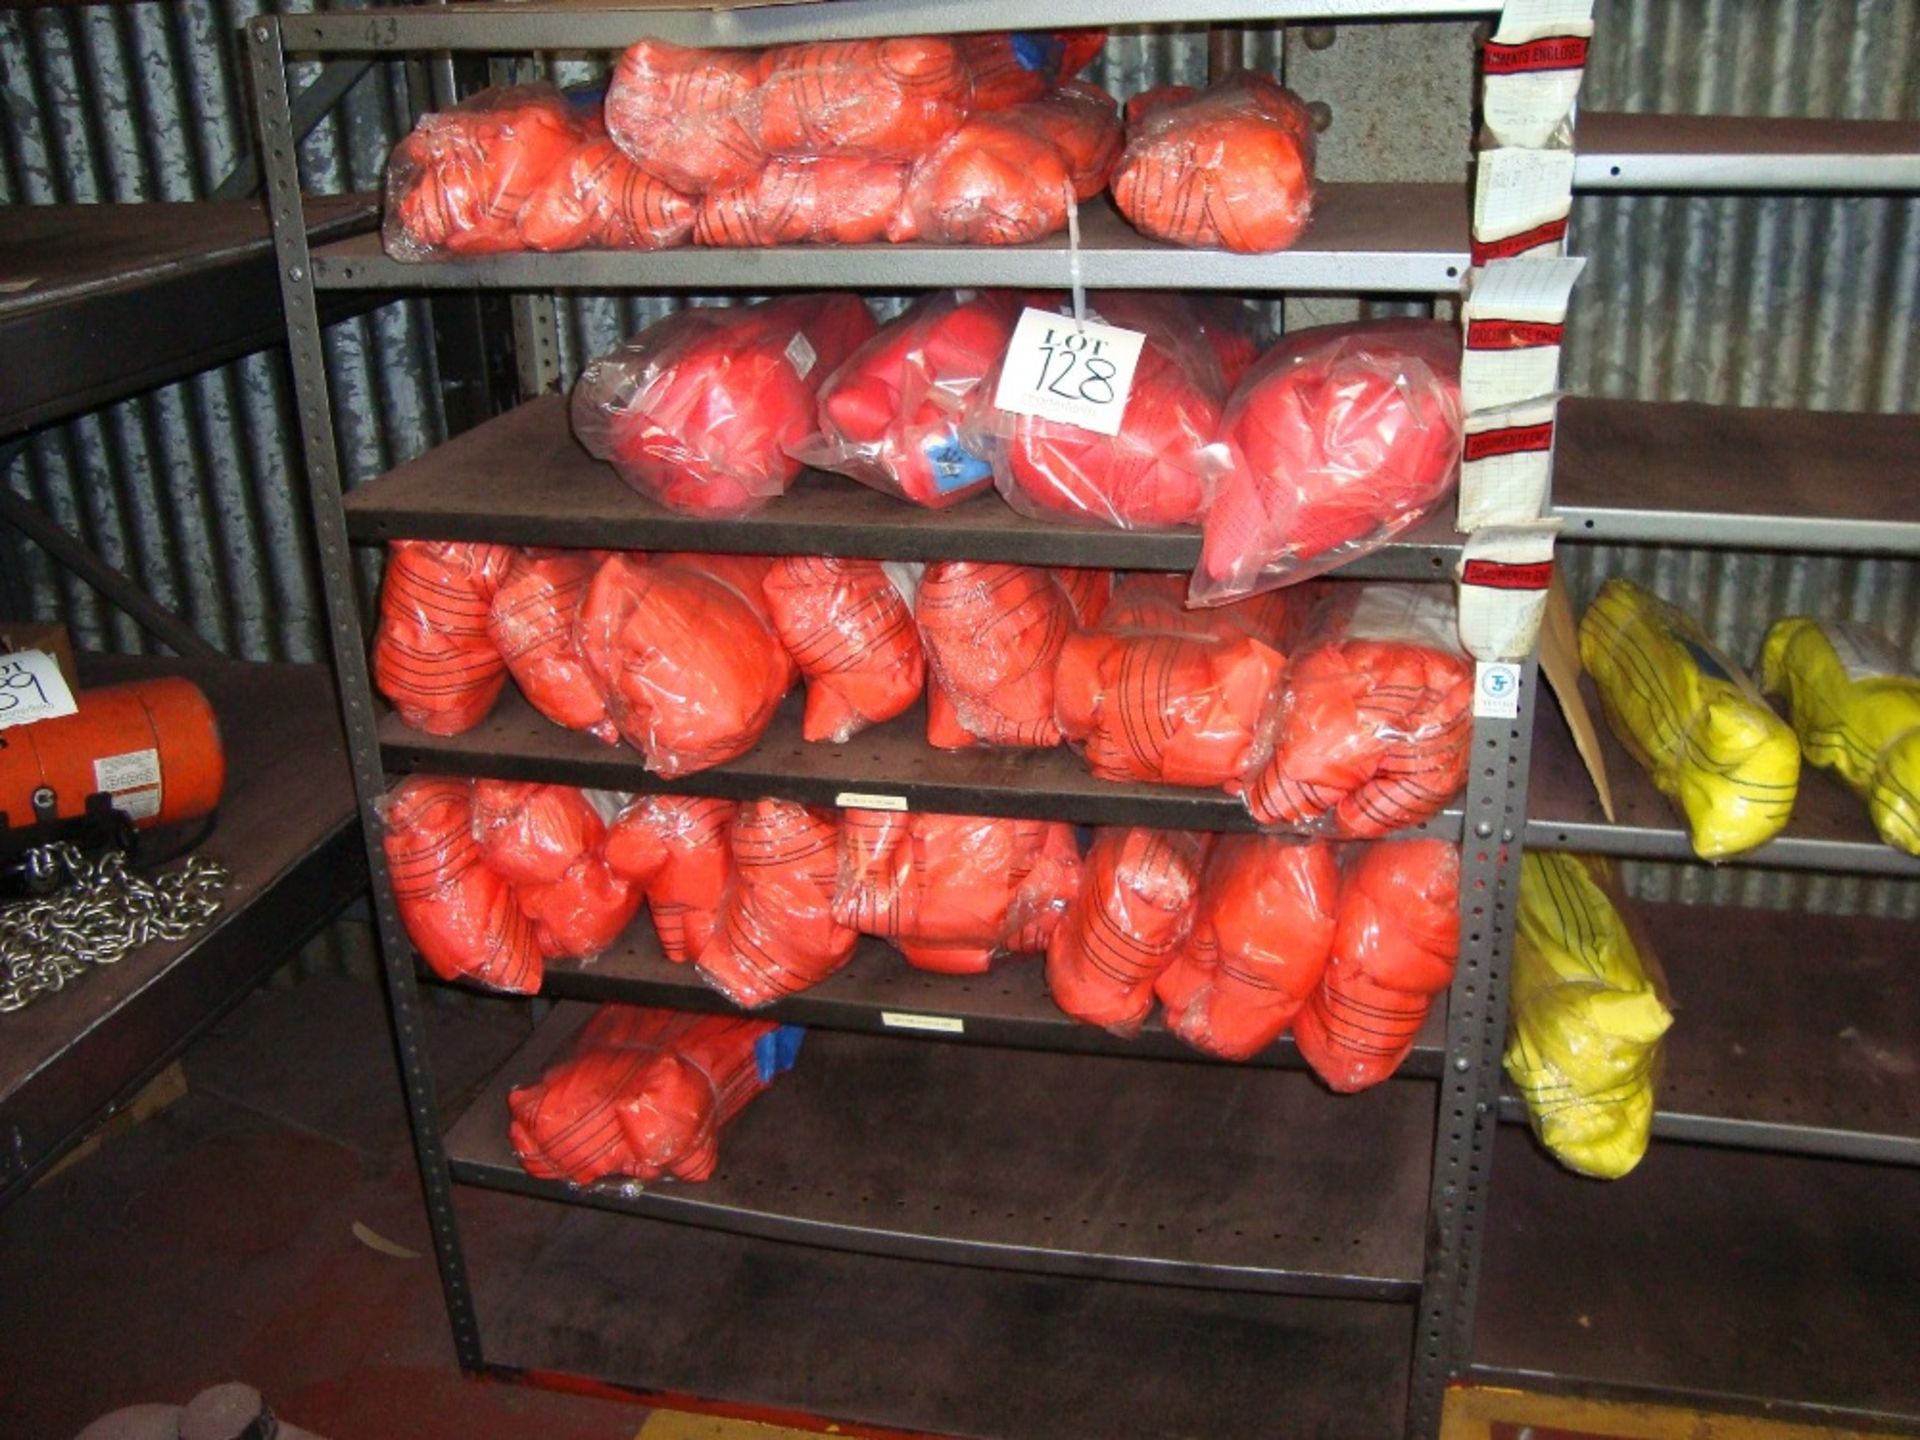 The stock of 1 tonne to 5 tonne various length webbing slings, 1 tonne to 5 tonne various length - Image 5 of 8